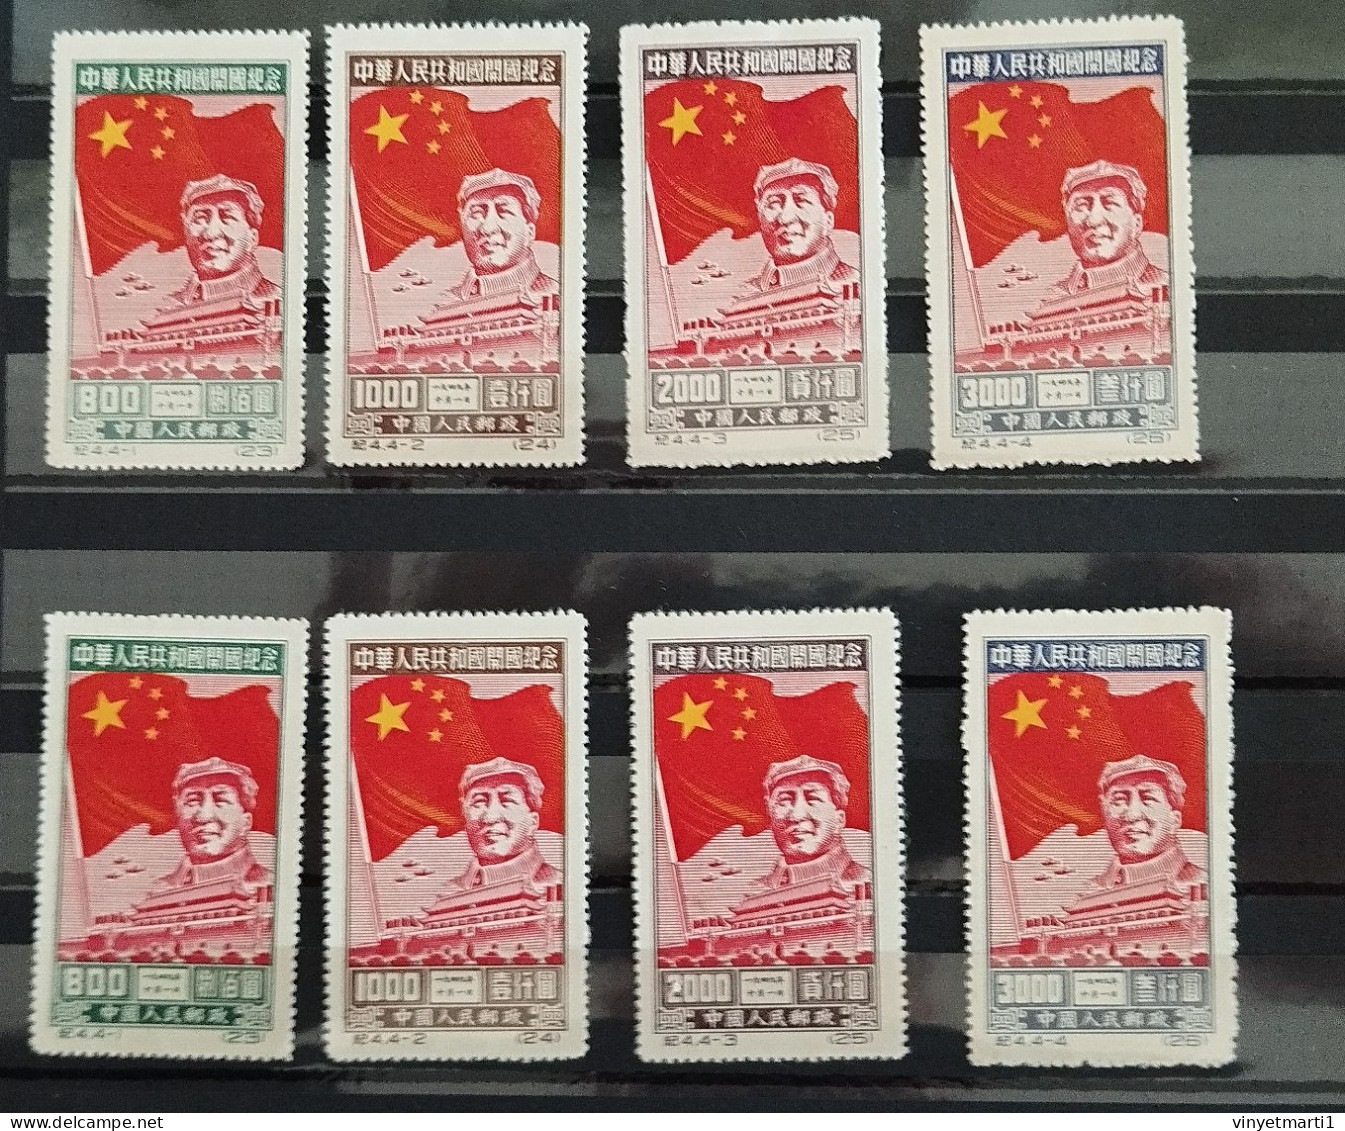 China Stamps Foundation Of People's Republic X 2 Reprints - Official Reprints